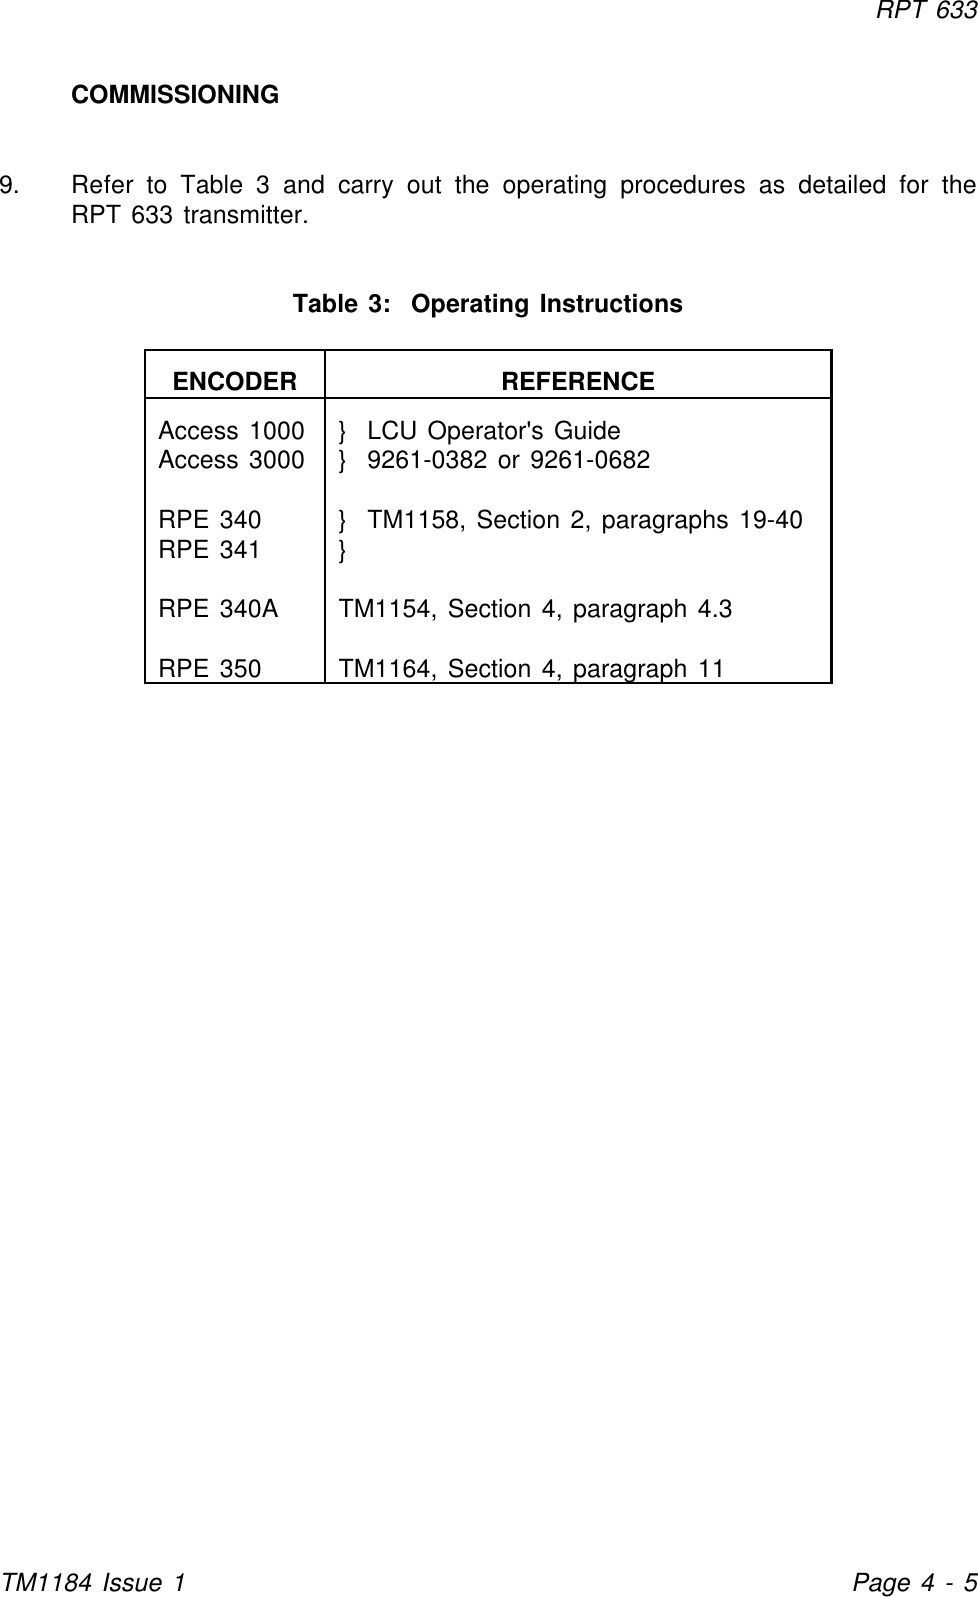 RPT 633TM1184 Issue 1Page 4 - 5COMMISSIONING9. Refer to Table 3 and carry out the operating procedures as detailed for theRPT 633 transmitter.Table 3:  Operating InstructionsENCODER REFERENCEAccess 1000 }  LCU Operator&apos;s GuideAccess 3000 }  9261-0382 or 9261-0682RPE 340 }  TM1158, Section 2, paragraphs 19-40RPE 341 }RPE 340A TM1154, Section 4, paragraph 4.3RPE 350 TM1164, Section 4, paragraph 11